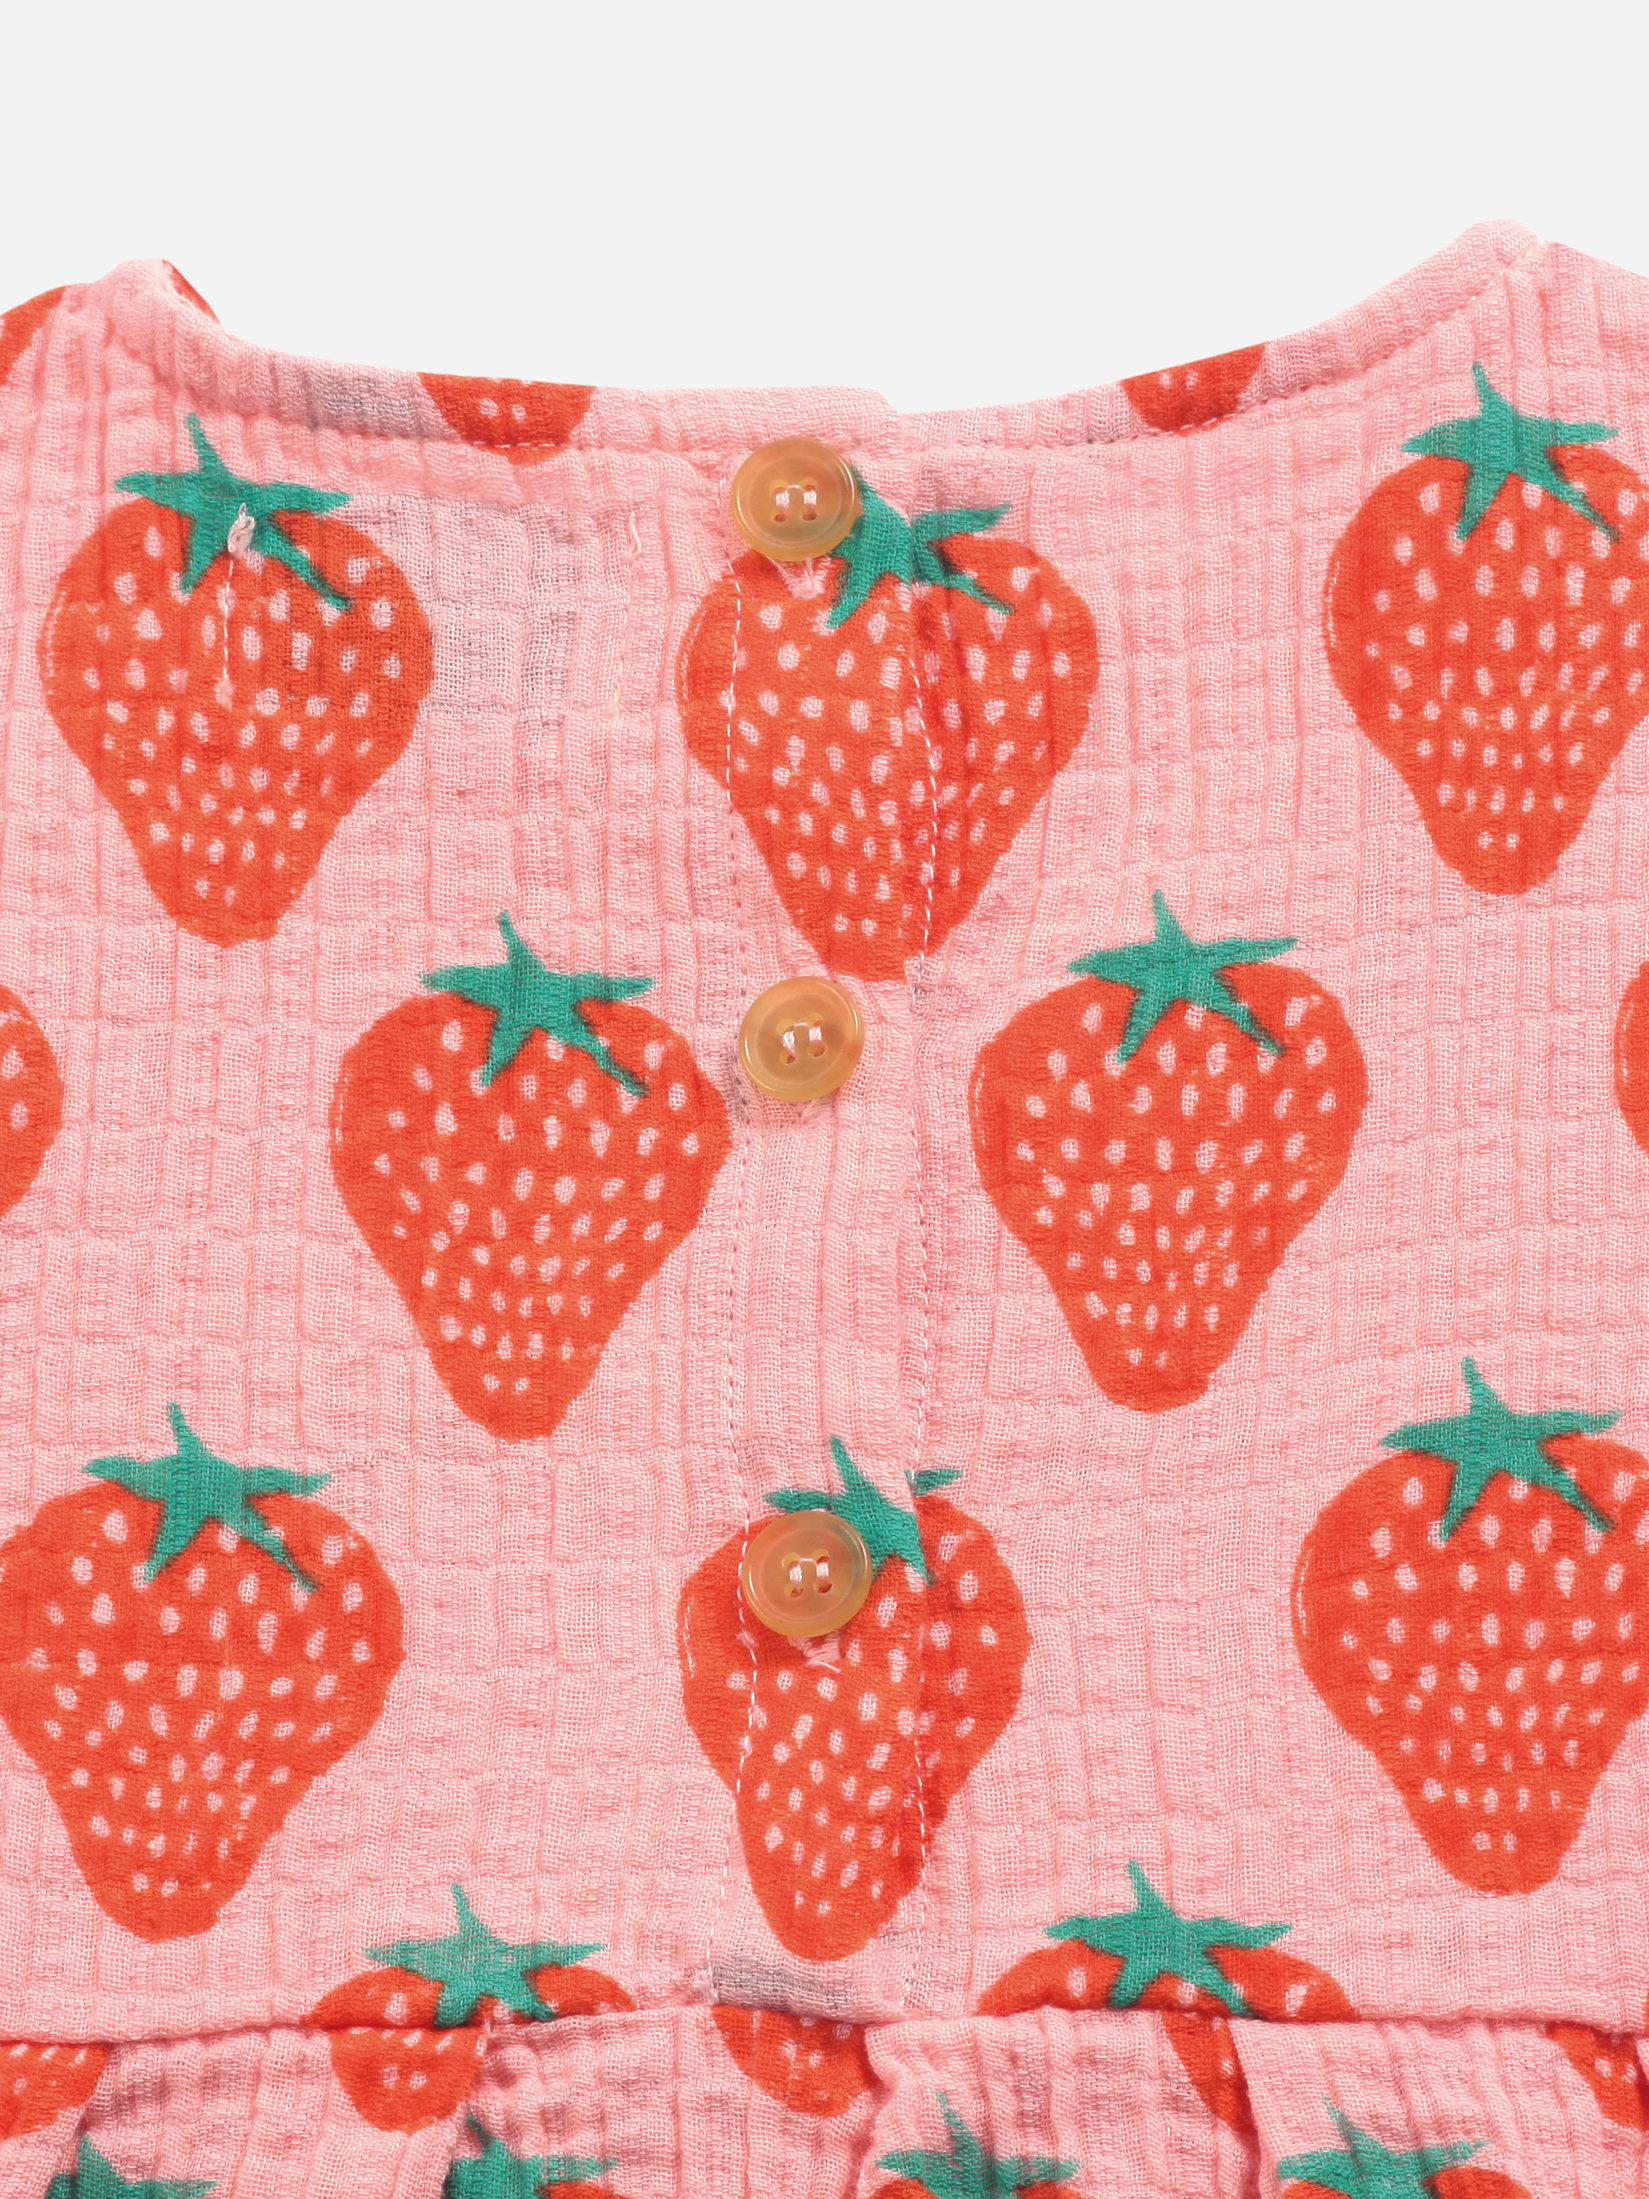 Kleid Strawberry all over woven